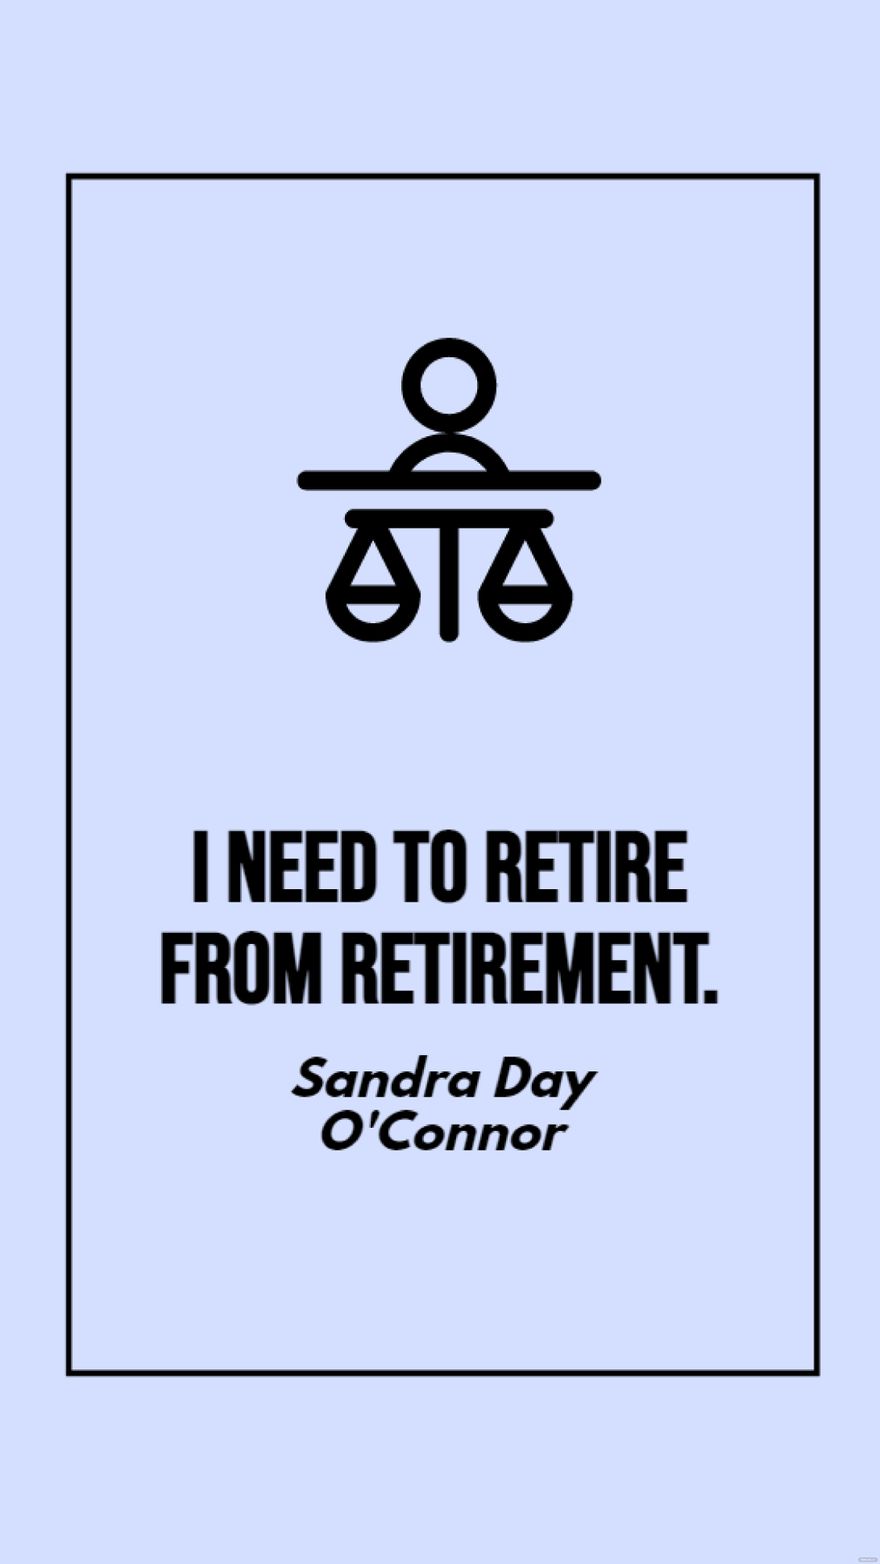 Free Sandra Day O'Connor - I need to retire from retirement. in JPG